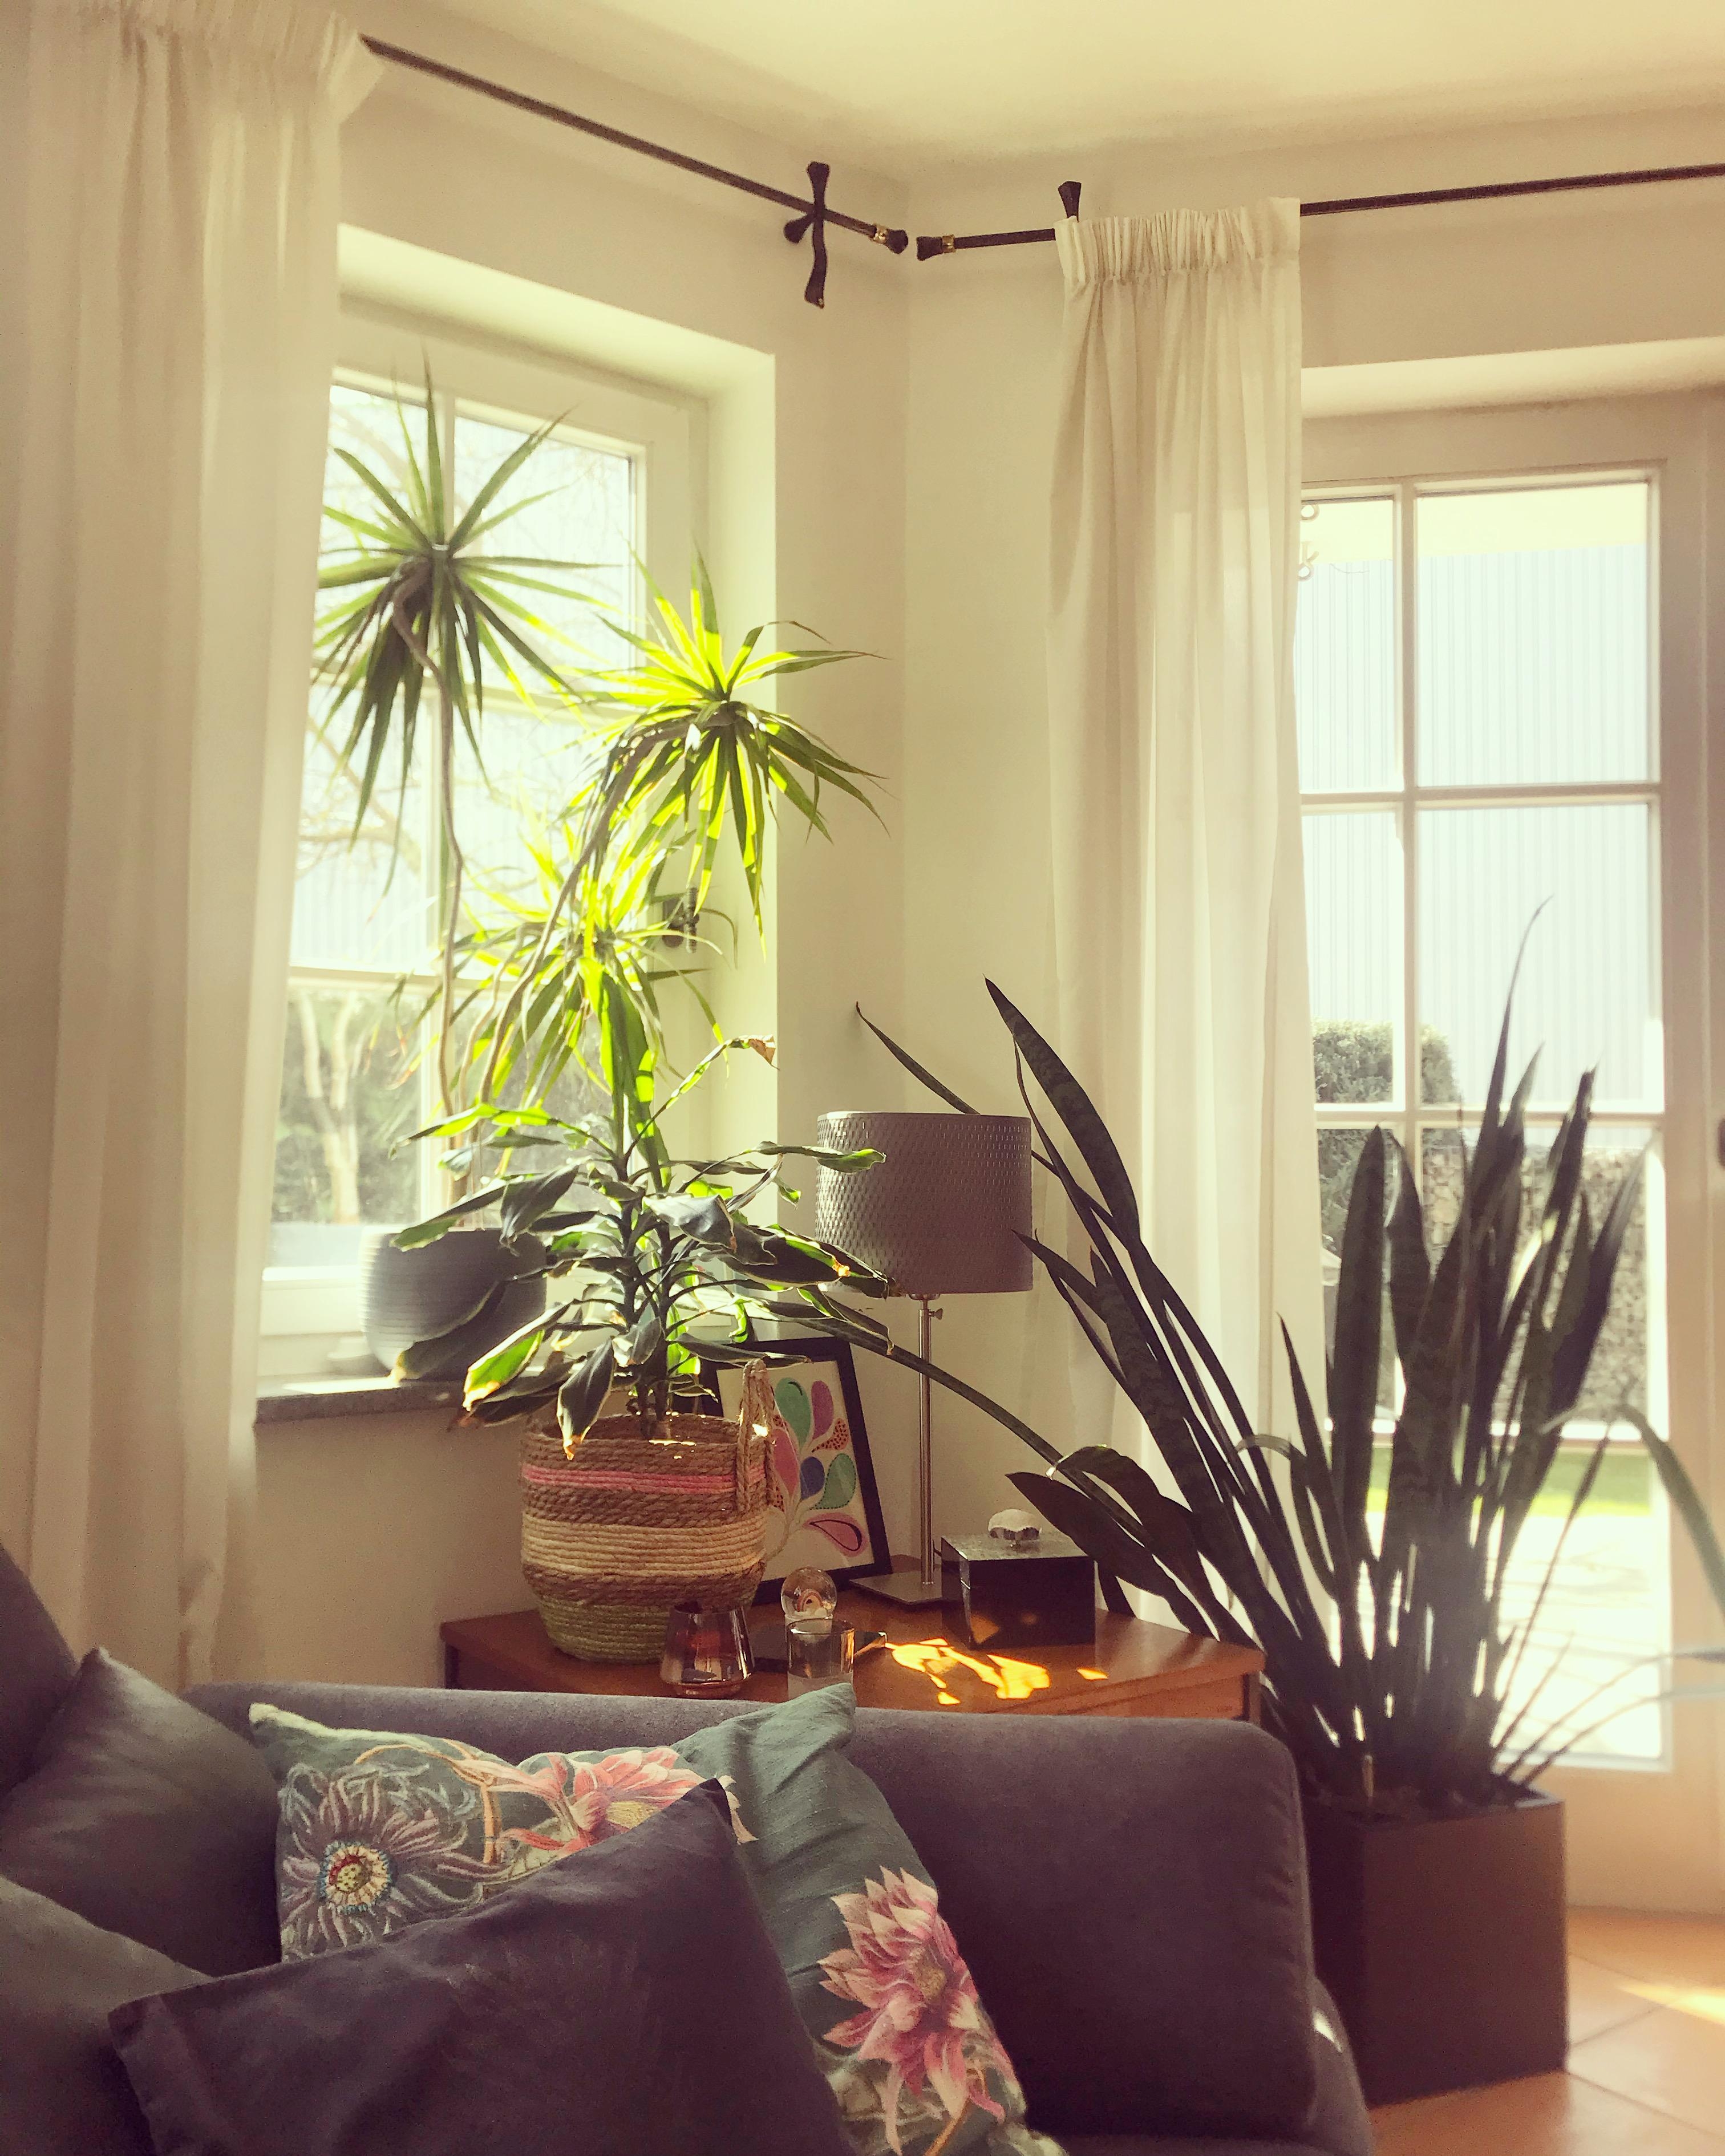 #sunshine #homesweethome #couch #pflanzenliebe